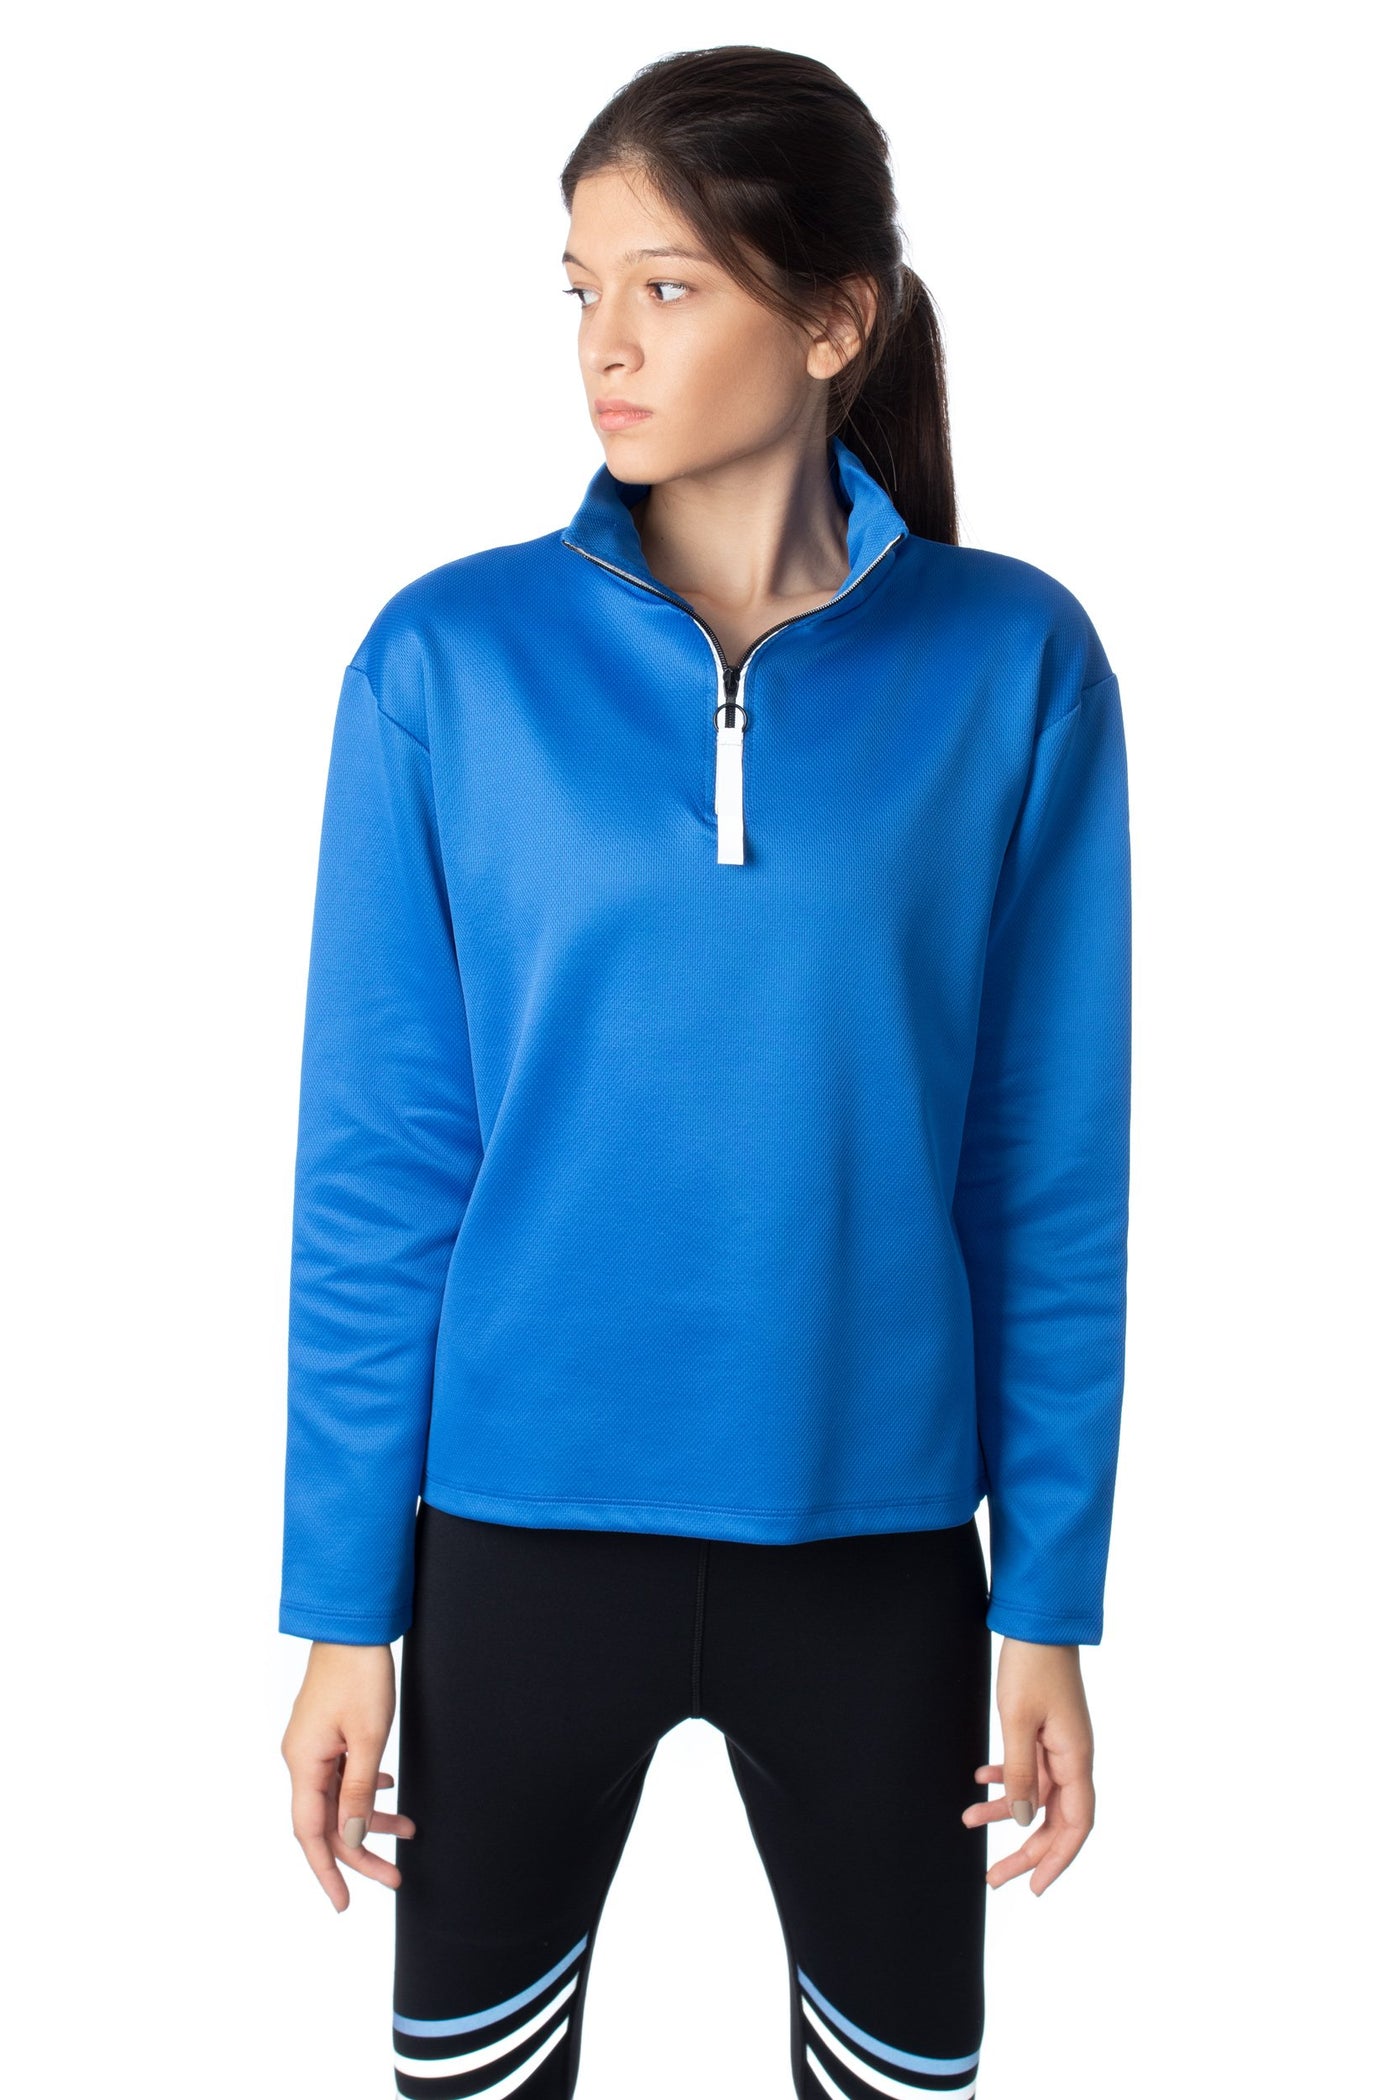 Hill & Dale Zippered High Neck Blue Jogging Sweatshirt With Reflective Print